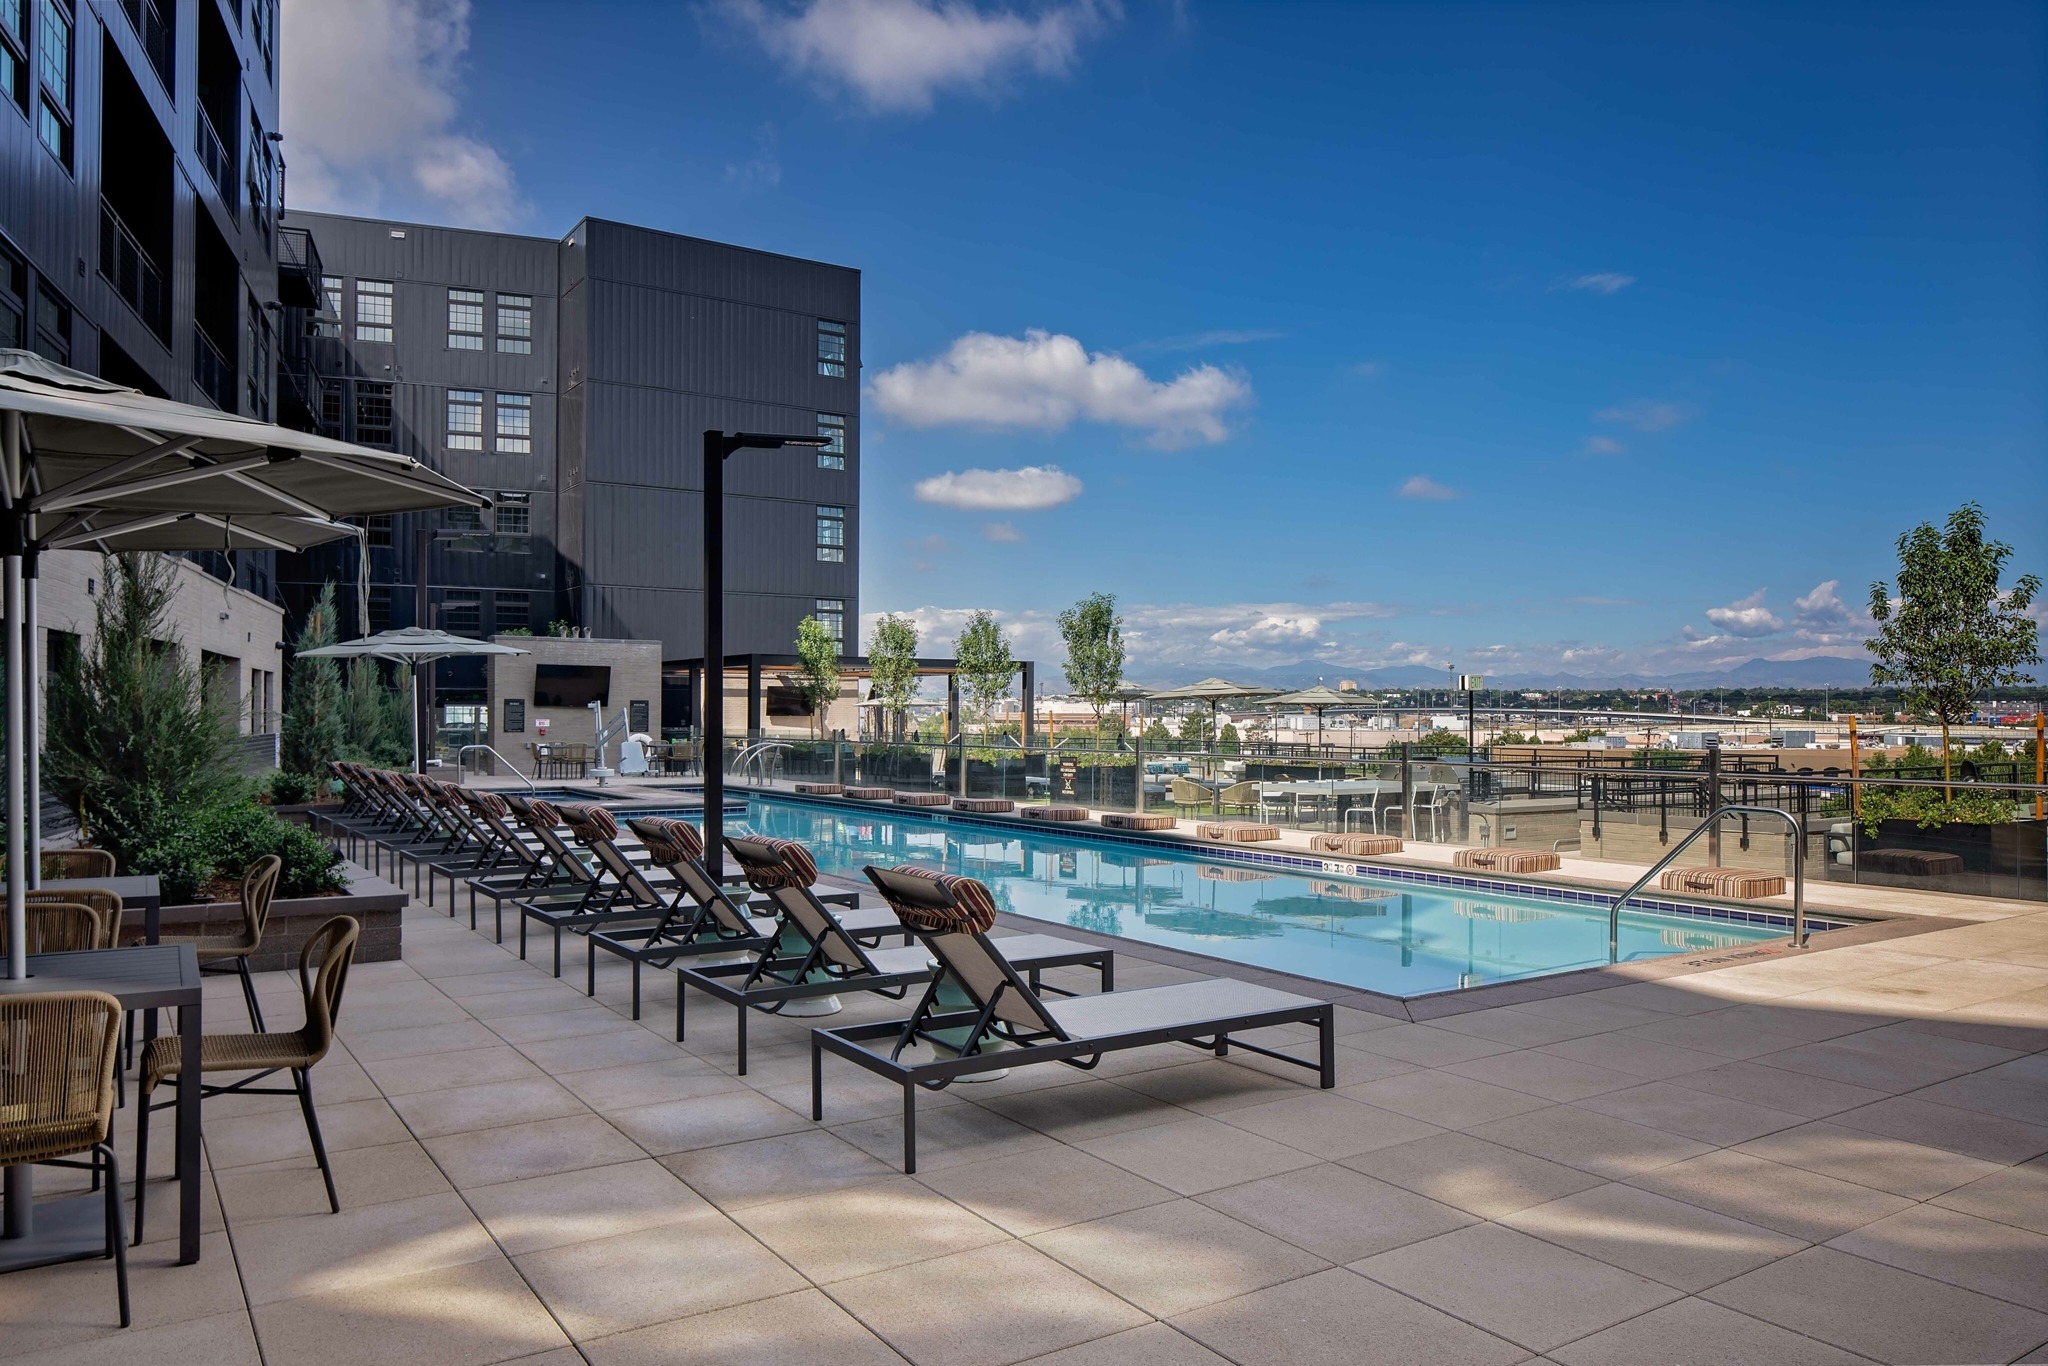 pool and sundeck with lounge chairs at modera art park apartment homes for rent in denver colorado